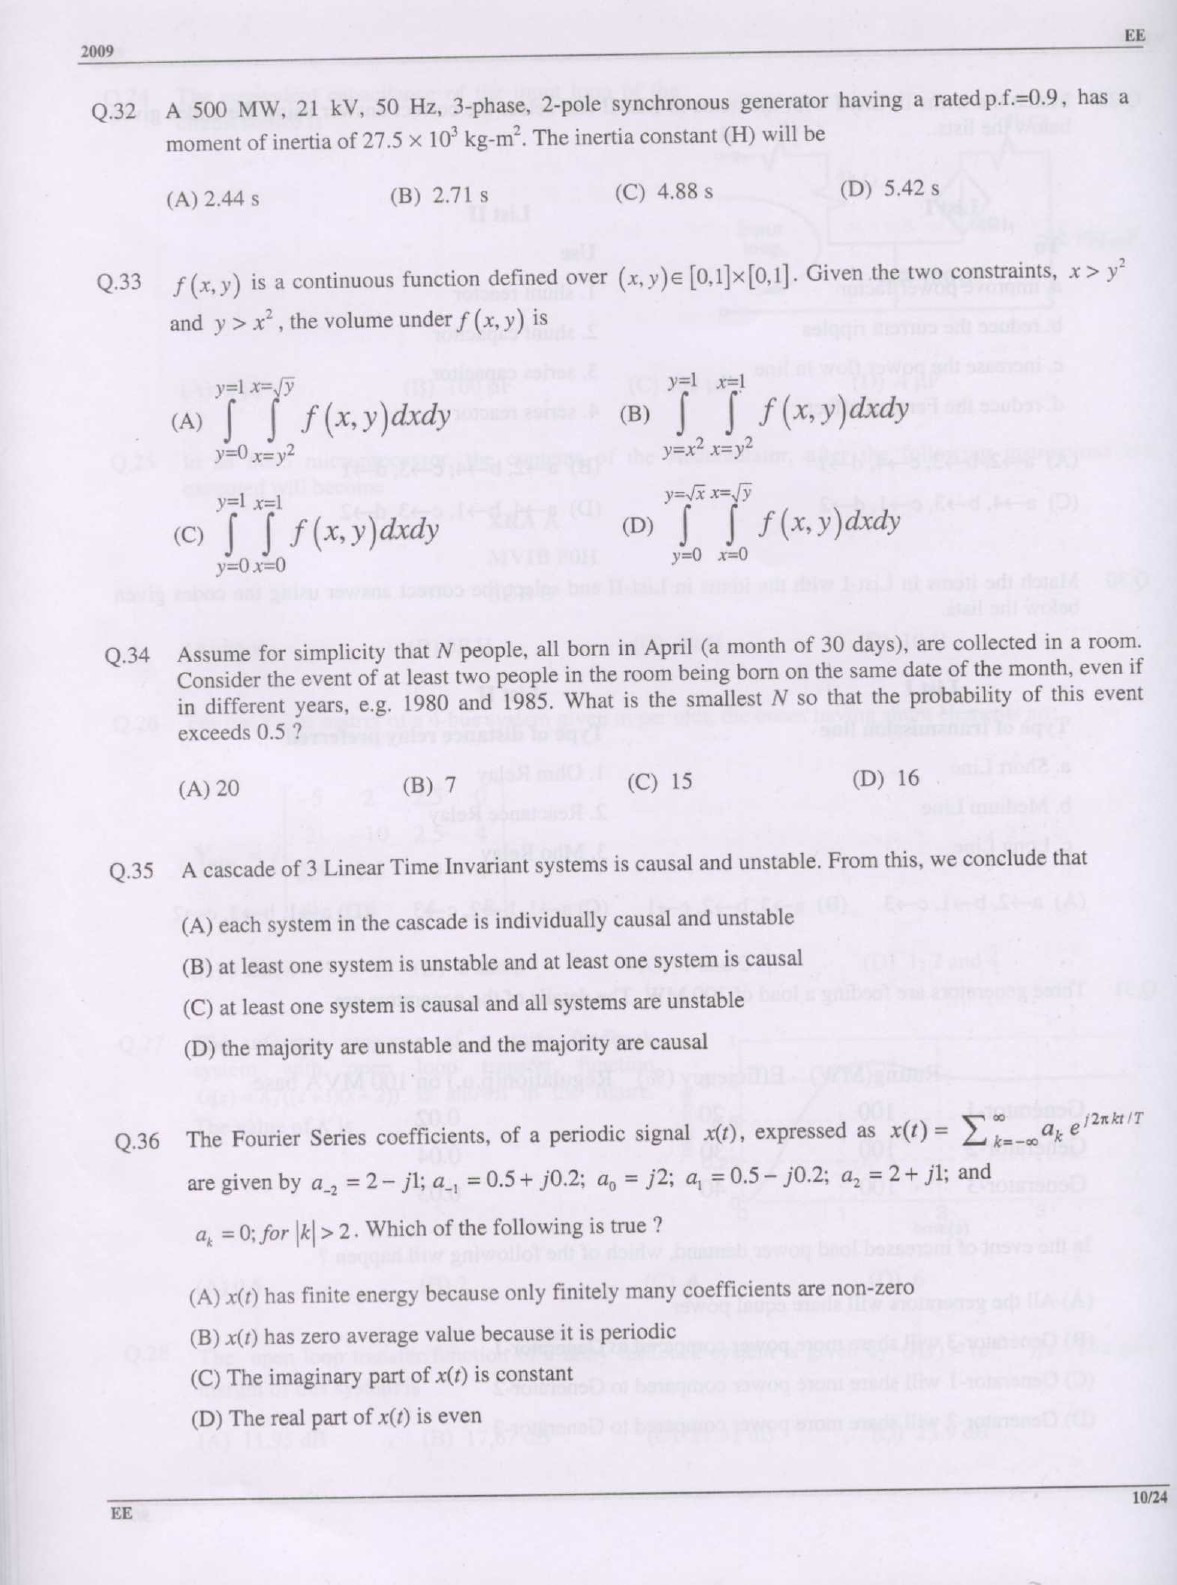 GATE Exam Question Paper 2009 Electrical Engineering 10